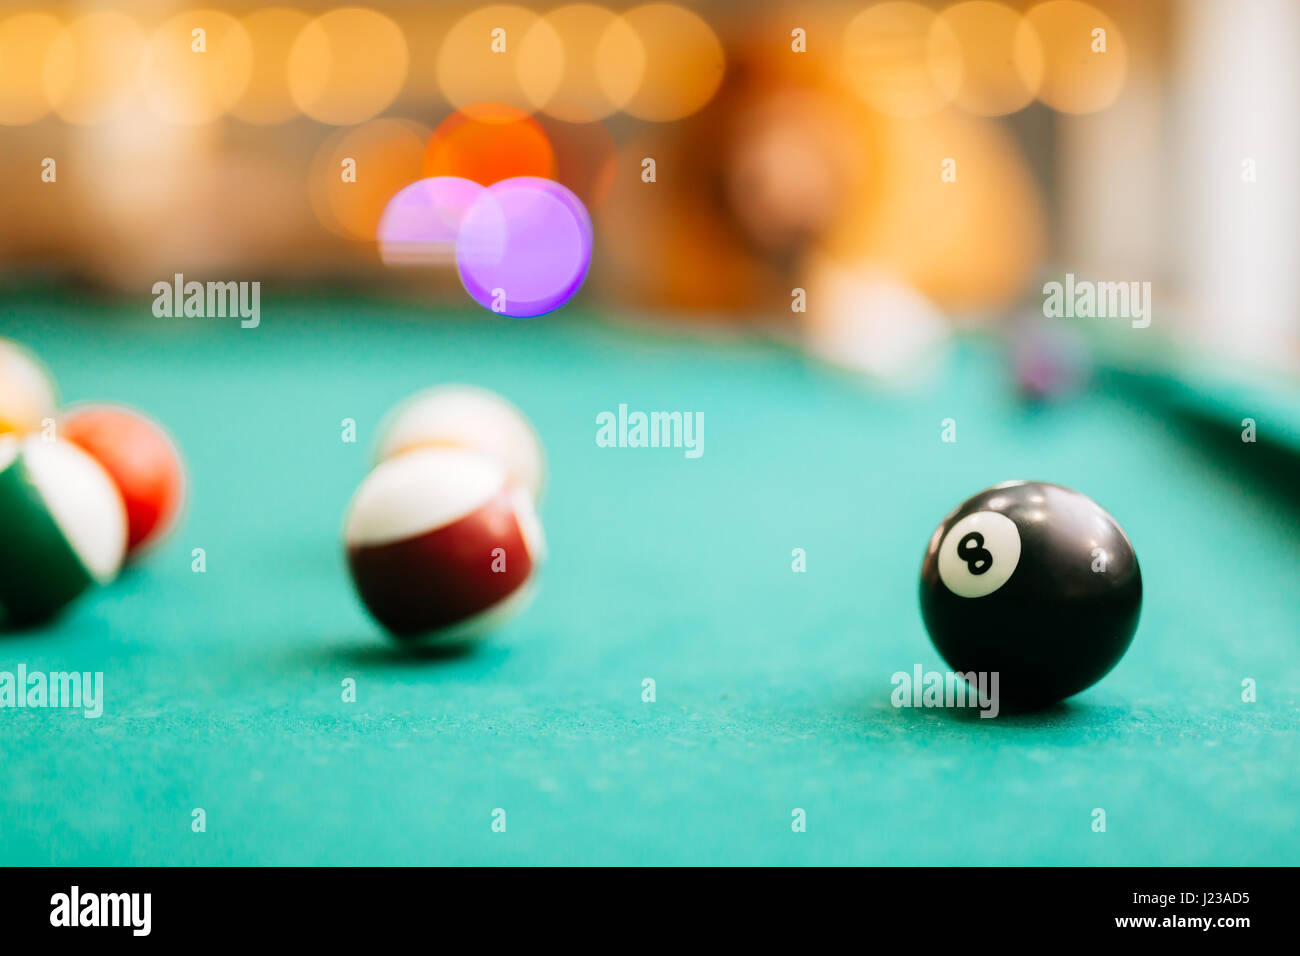 Snooker 8 Ball Pool Banque D'Images